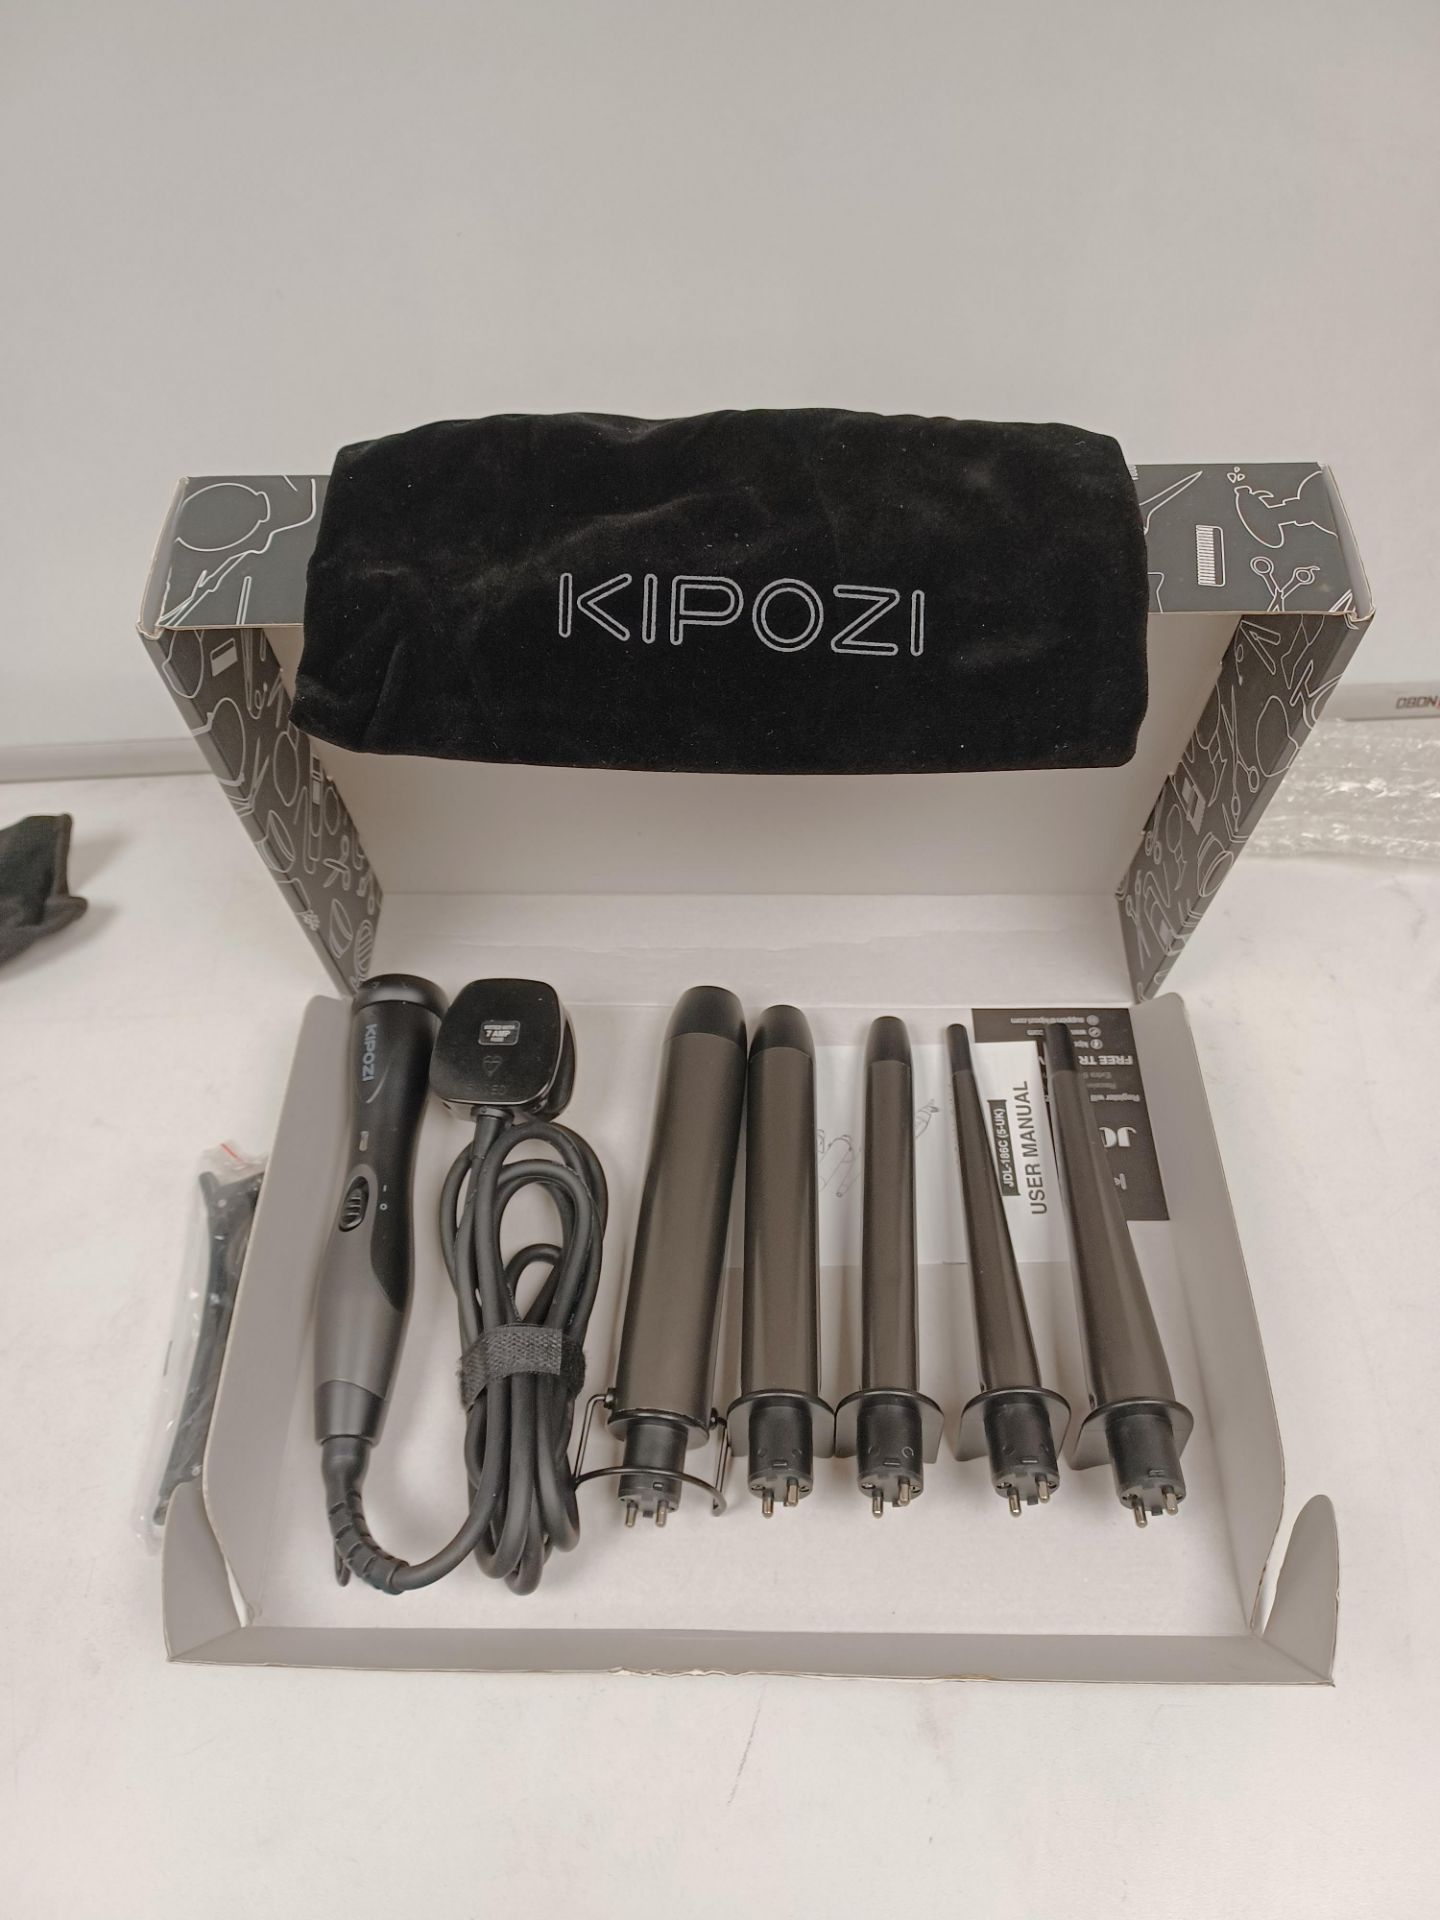 2 X NEW BOXED KIPOZI 5 IN 1. PROFESSIONAL CERAMIC INTERCHANGEABLE CURLING WAND SETS. JDL-186C. OFC